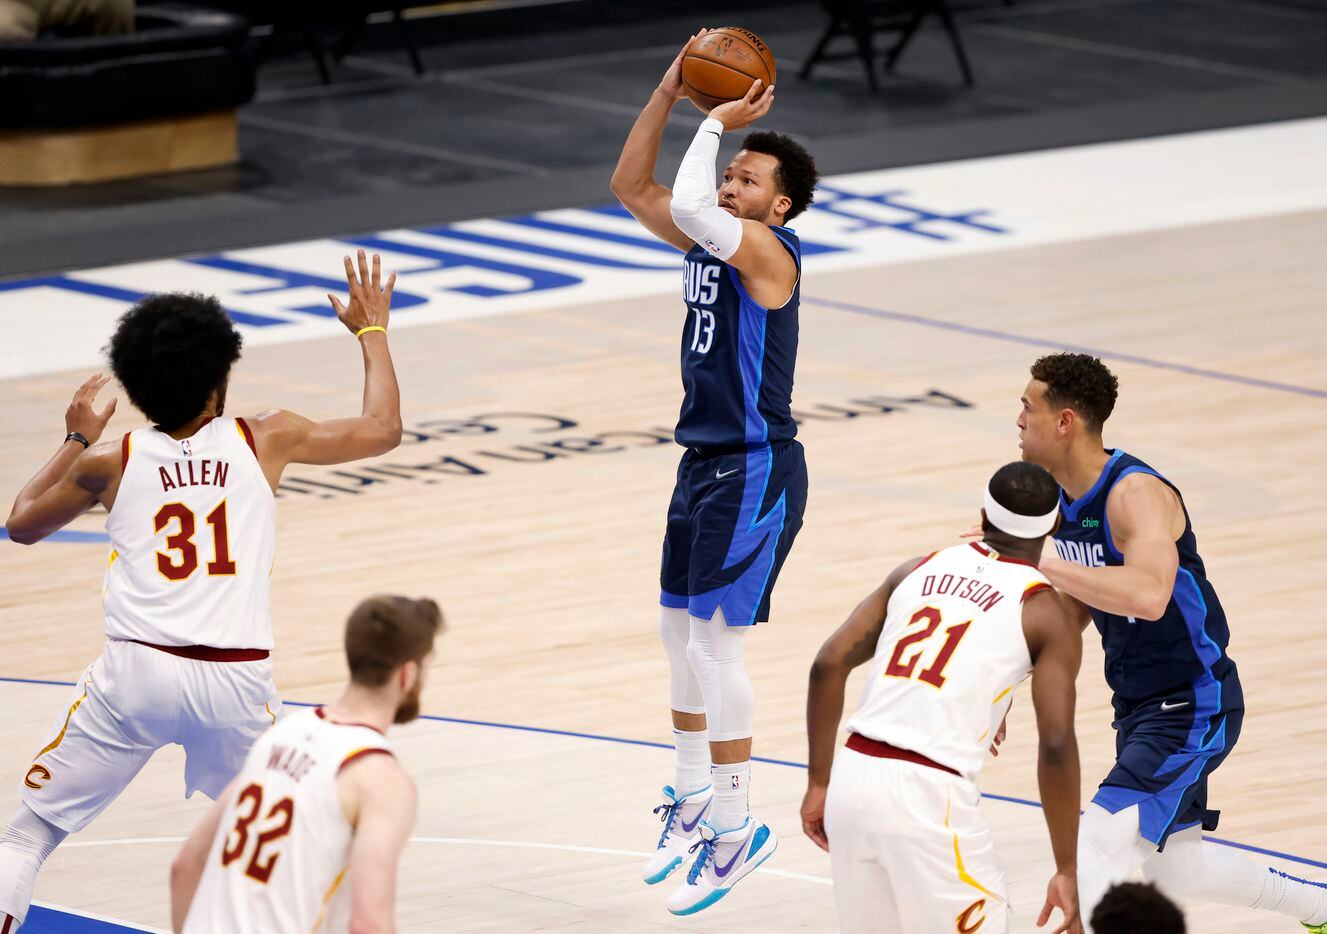 Dallas Mavericks guard Jalen Brunson (13) puts up an open jump shot against the Cleveland Cavaliers during the first quarter at the American Airlines Center in Dallas, Friday, May 7, 2021. (Tom Fox/The Dallas Morning News)